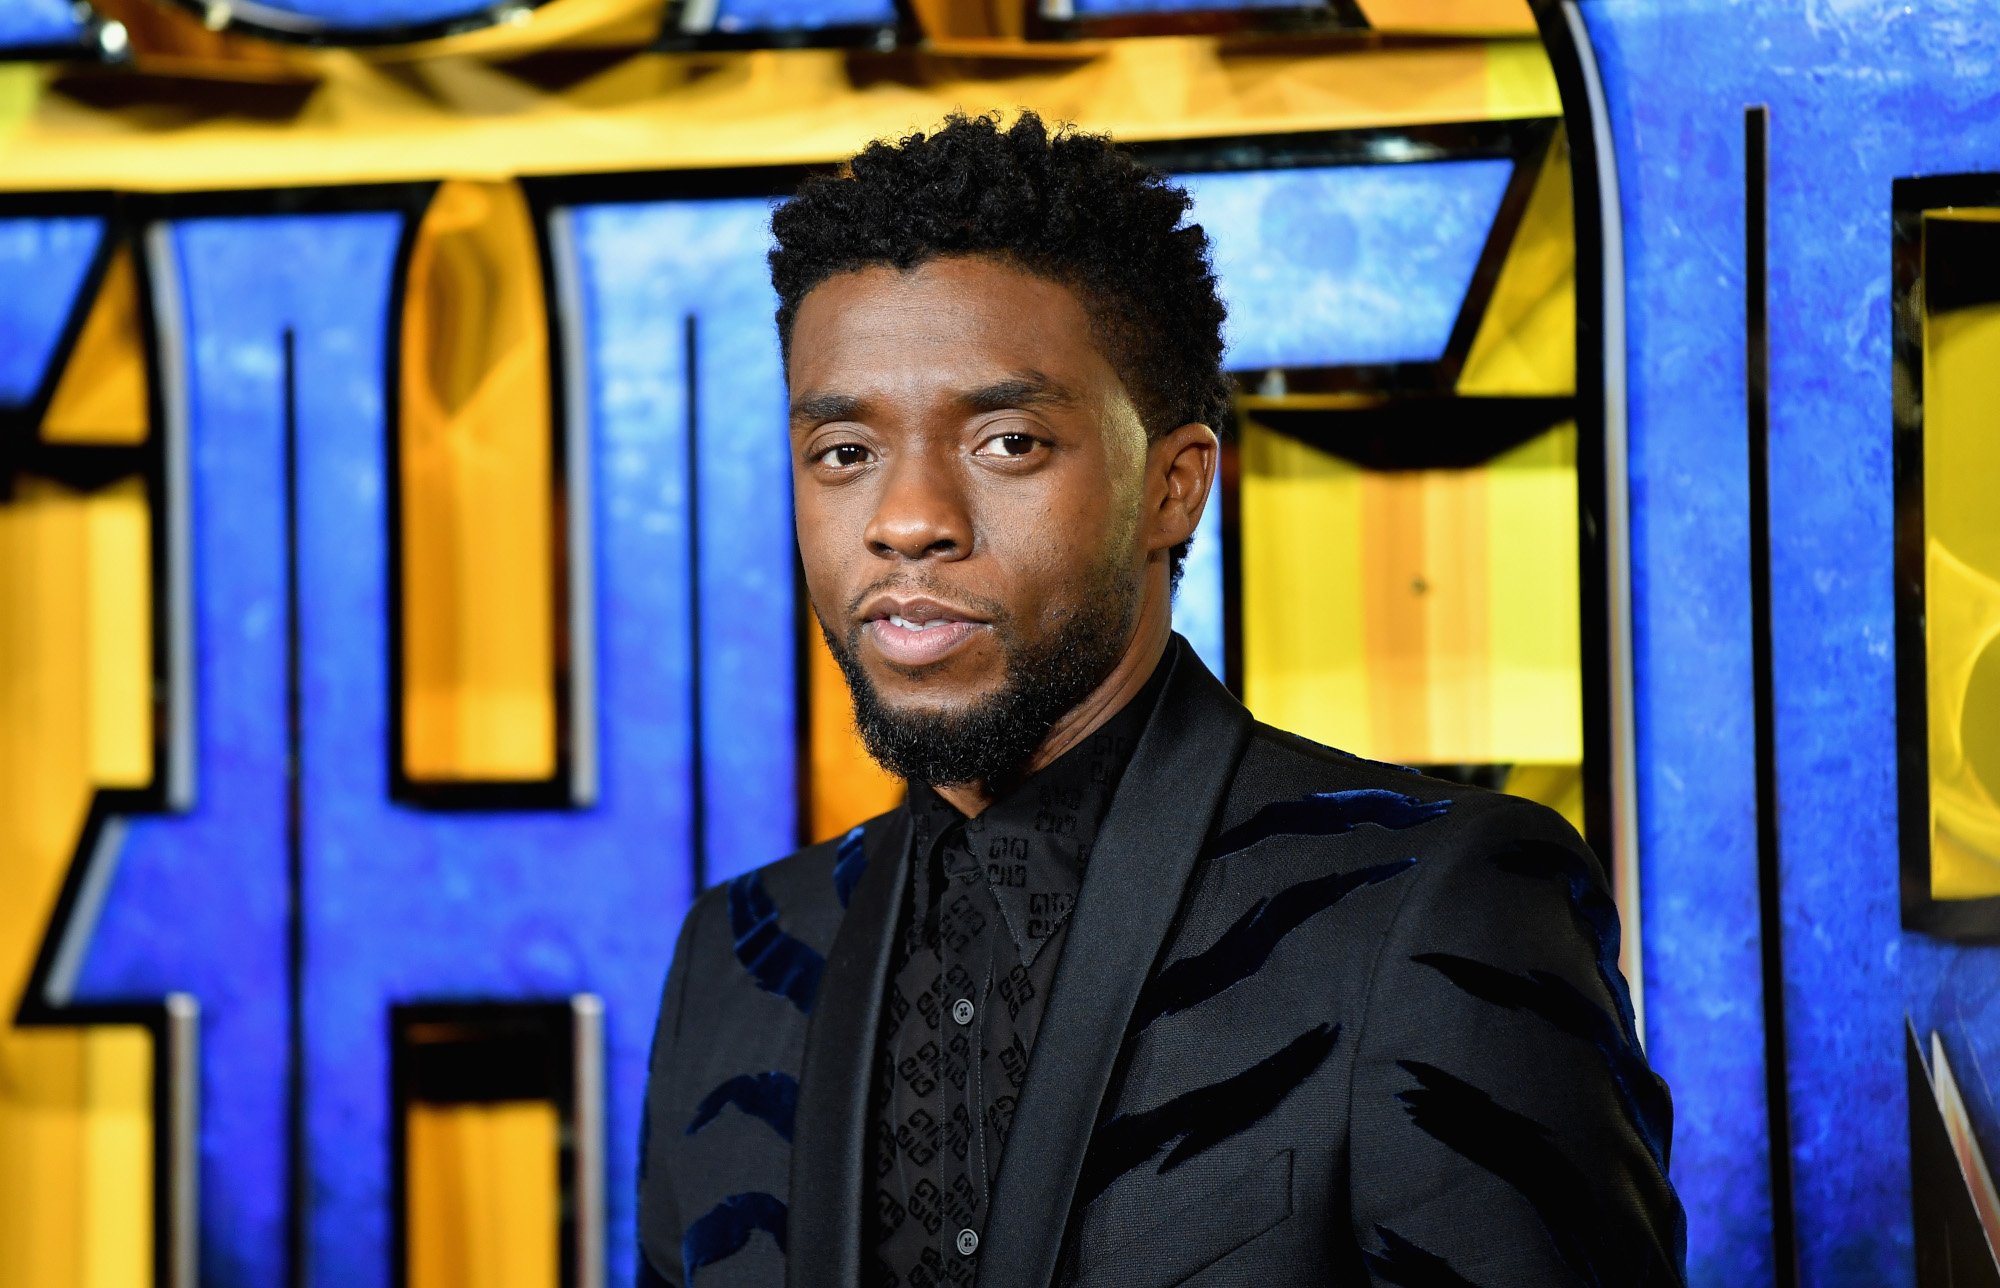 'Black Panther' star Chadwick Boseman. He's wearing a black suit and standing in front of a blue and yellow wall.